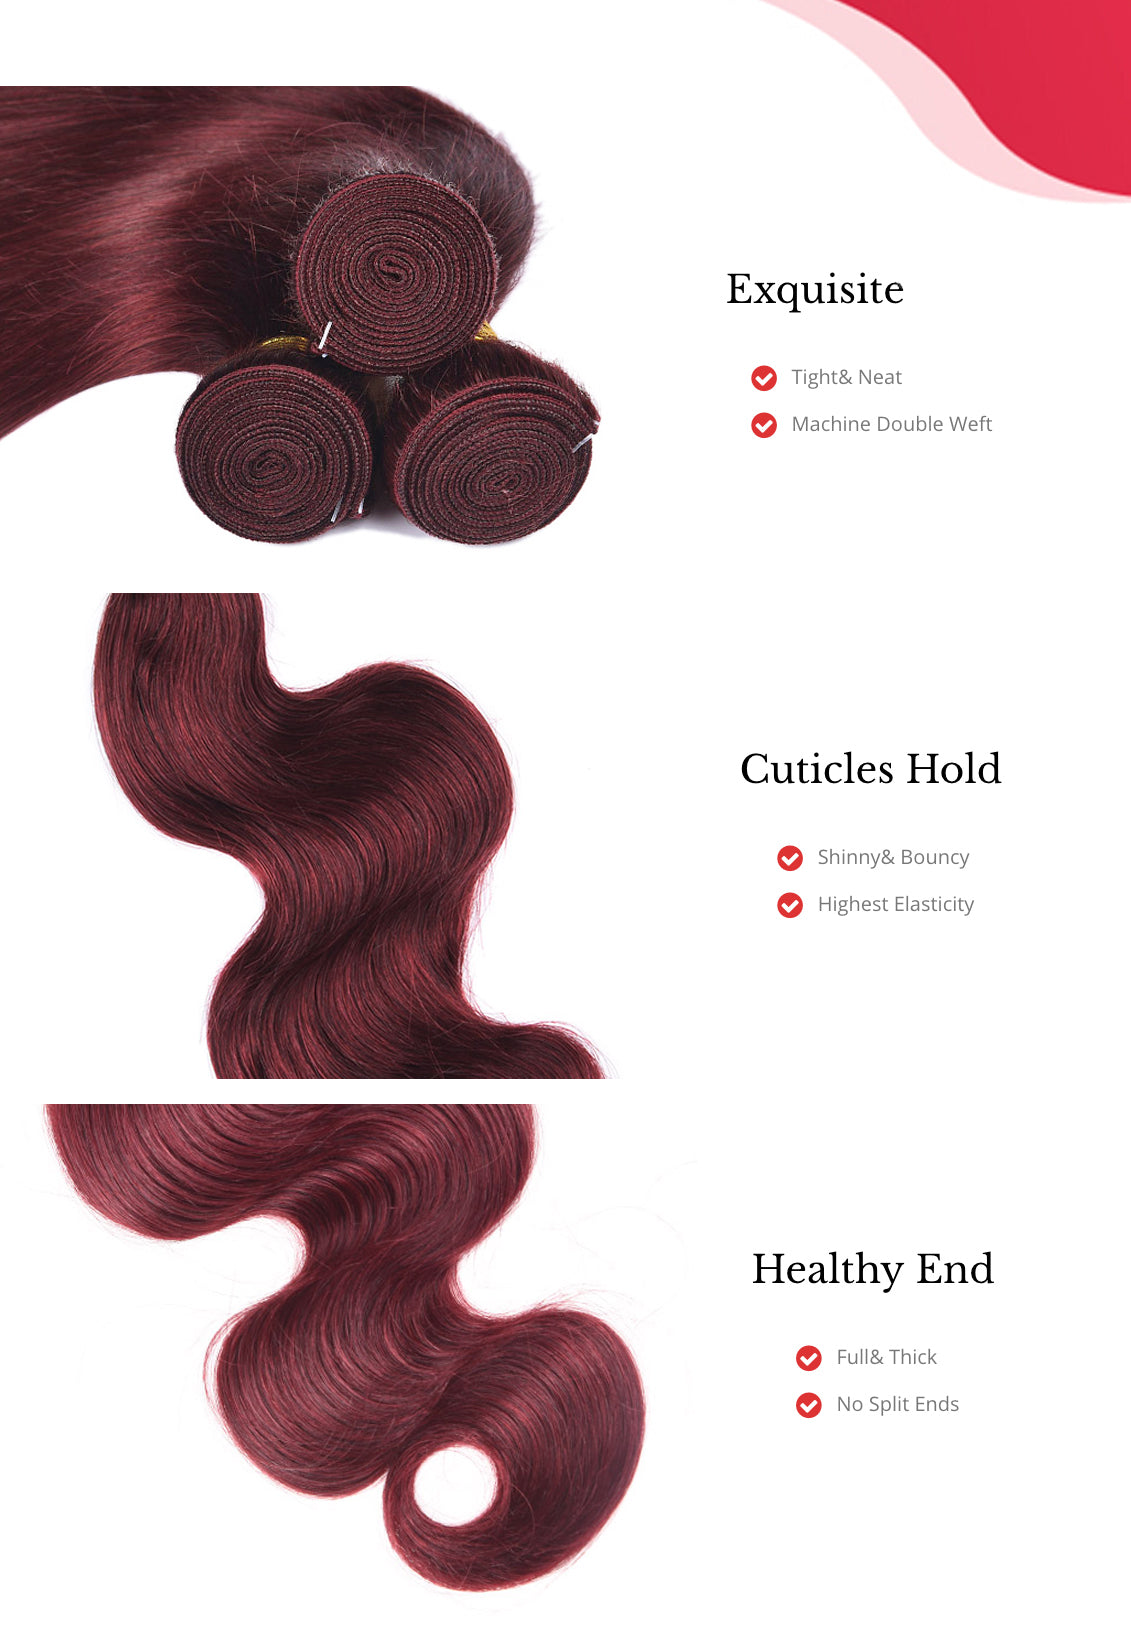 MarchQueen goodPeruvian Human Hair Body Wave 3 Bundles Remy Hair Weave 7 Colors 10-24 Inch On Sale